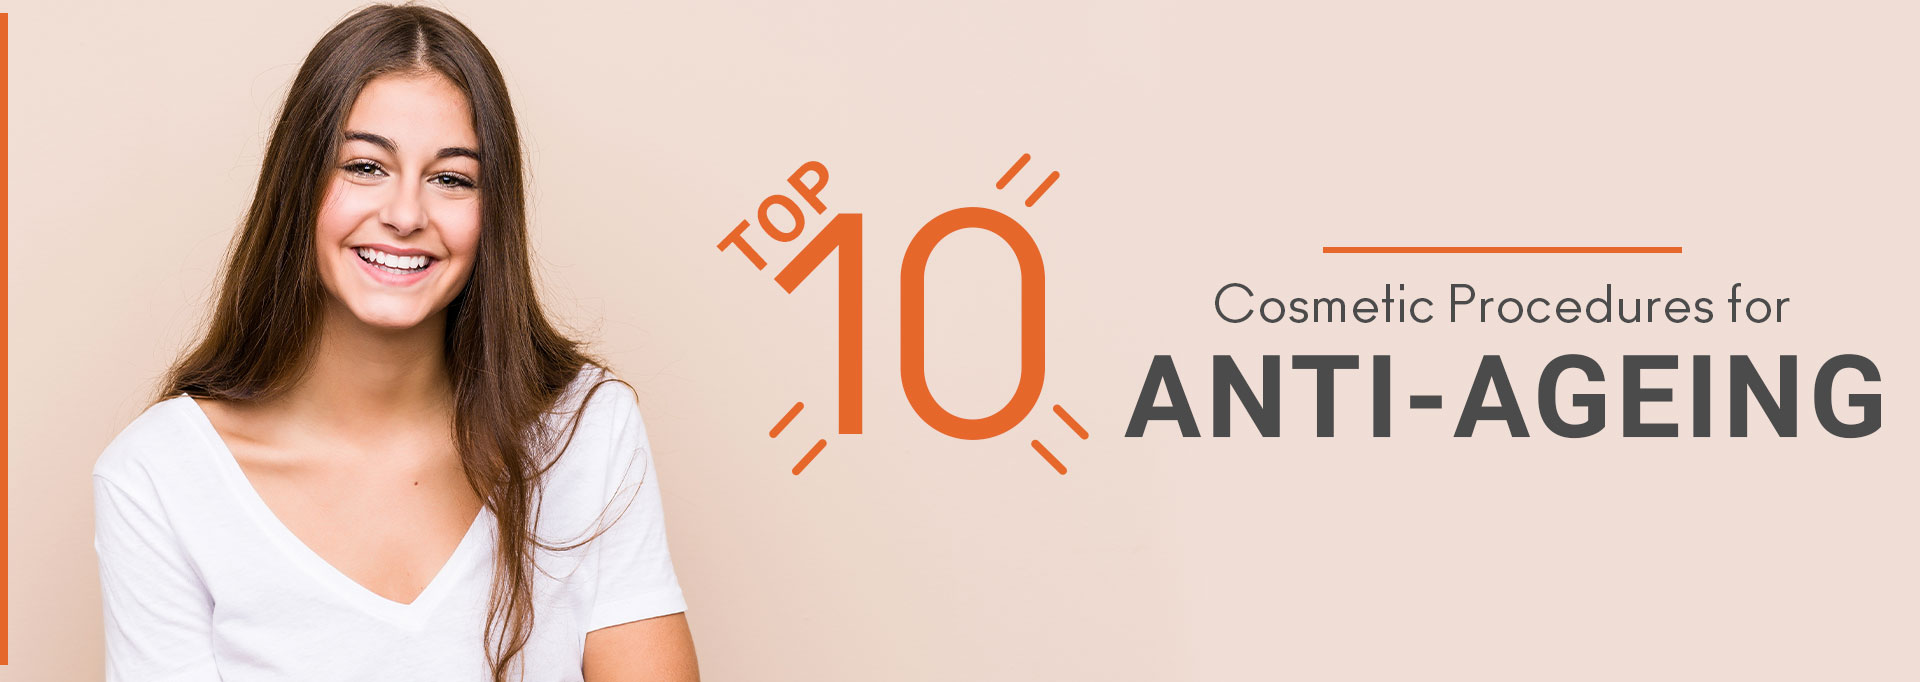 Top 10 cosmetic procedures for anti-ageing